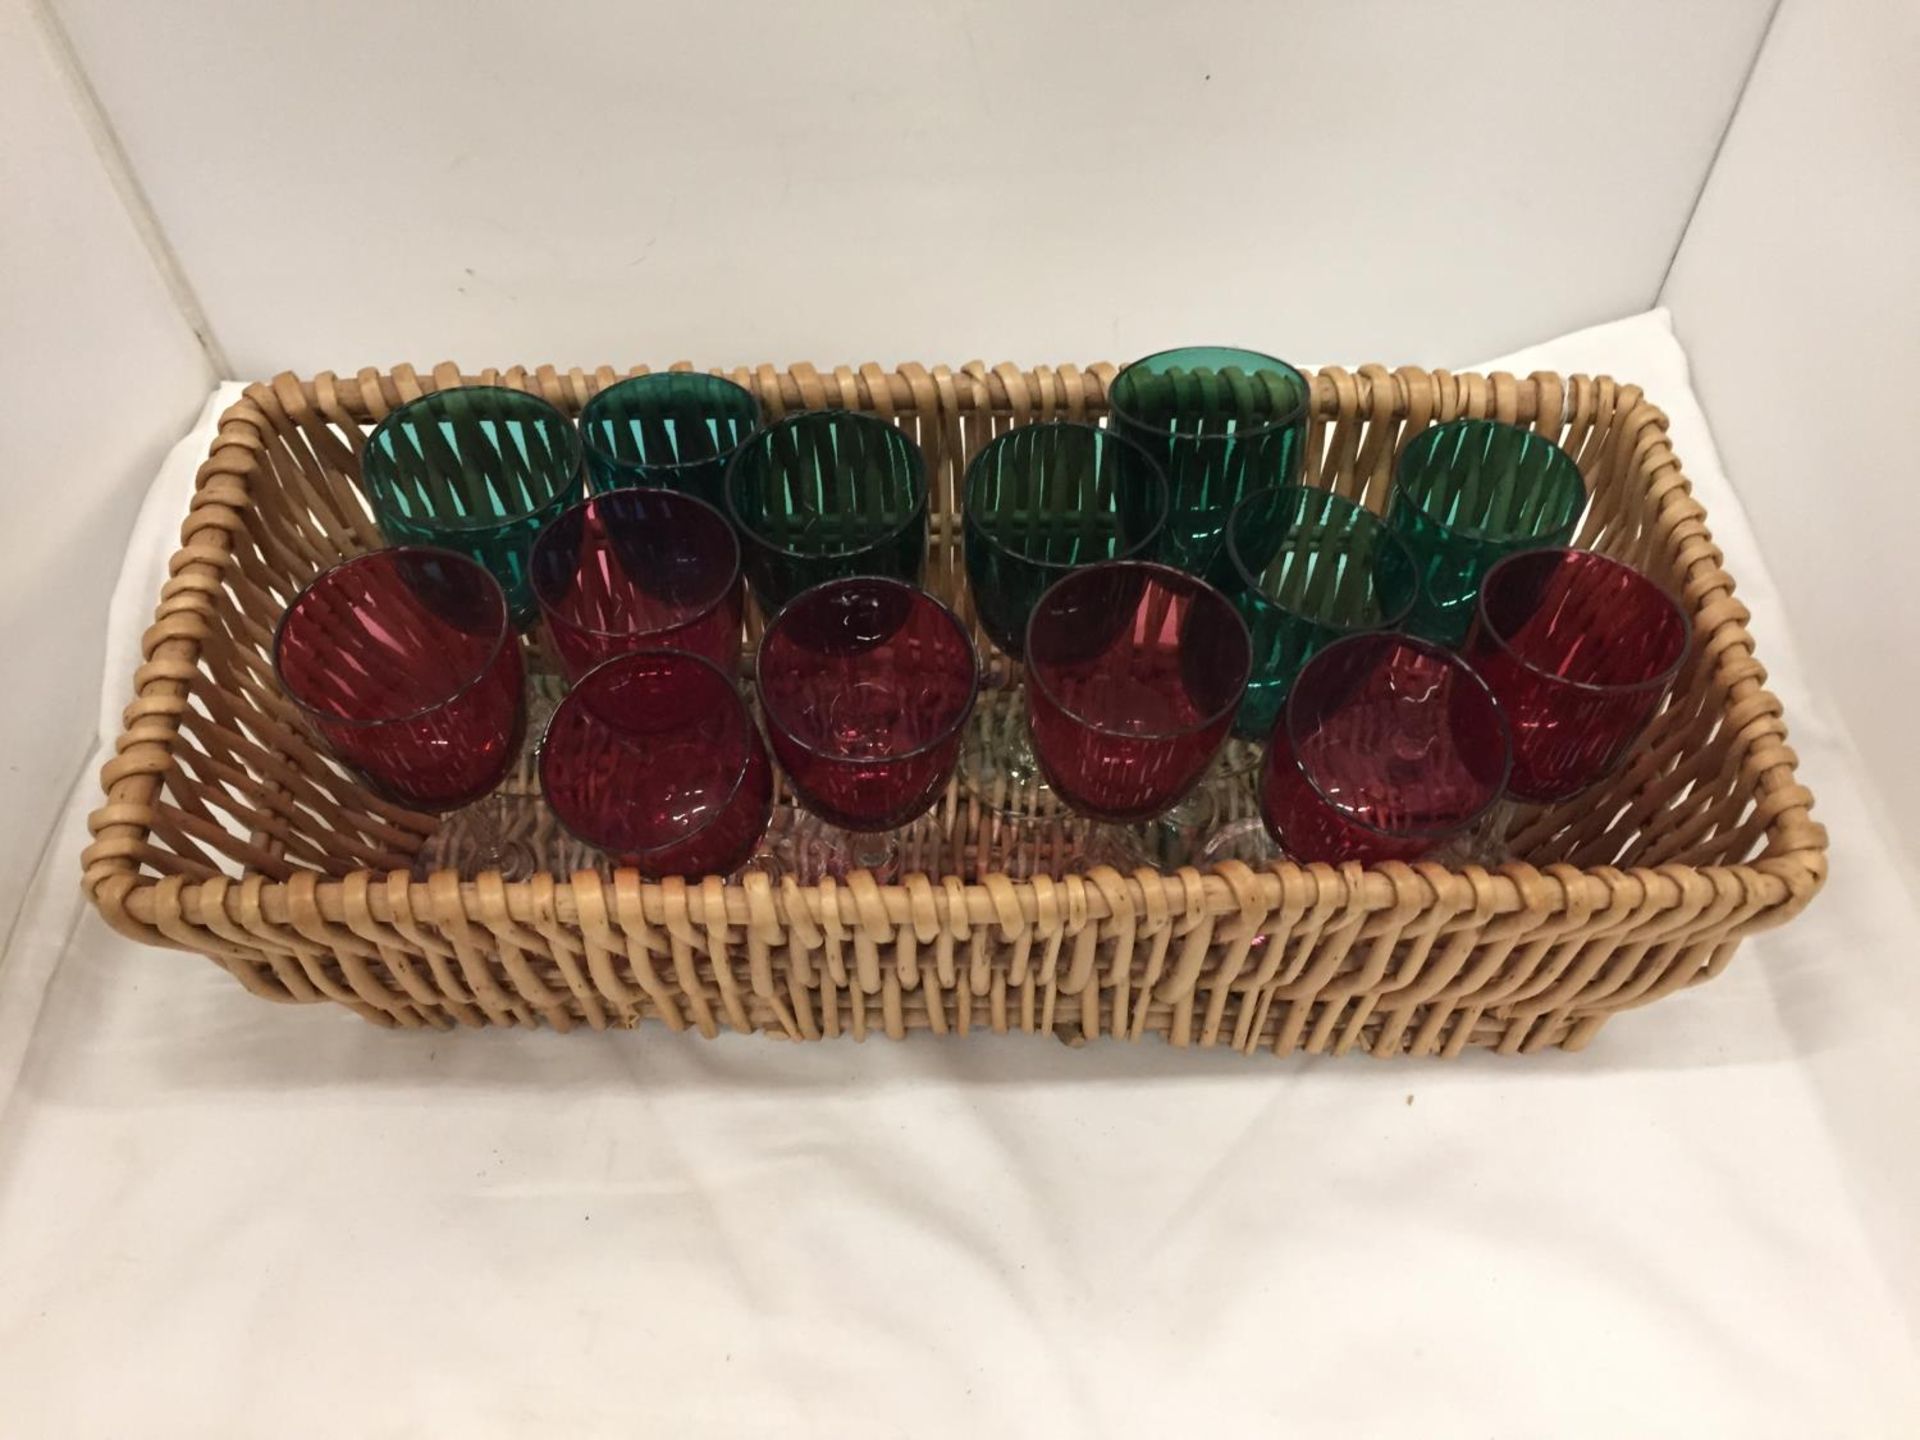 A WICKER BASKET CONTAINING FOURTEEN RED AND GREEN WINE GLASSES